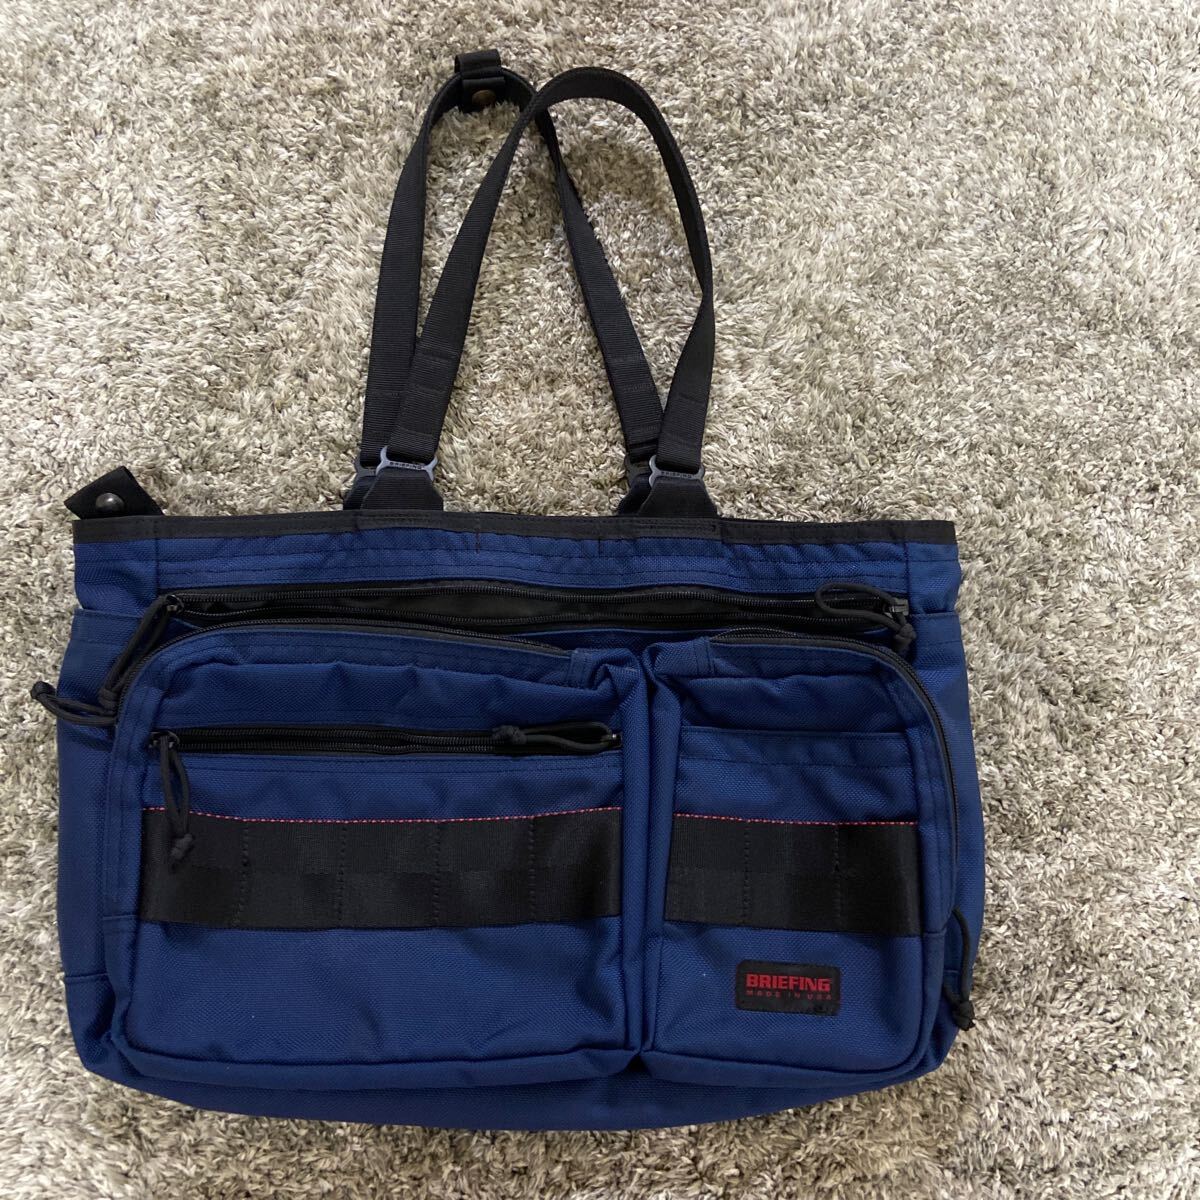 BRIEFING ブリーフィング トートバッグ ミッドナイト アメリカ製 ビジネストートBS TOTE WIDE _画像1